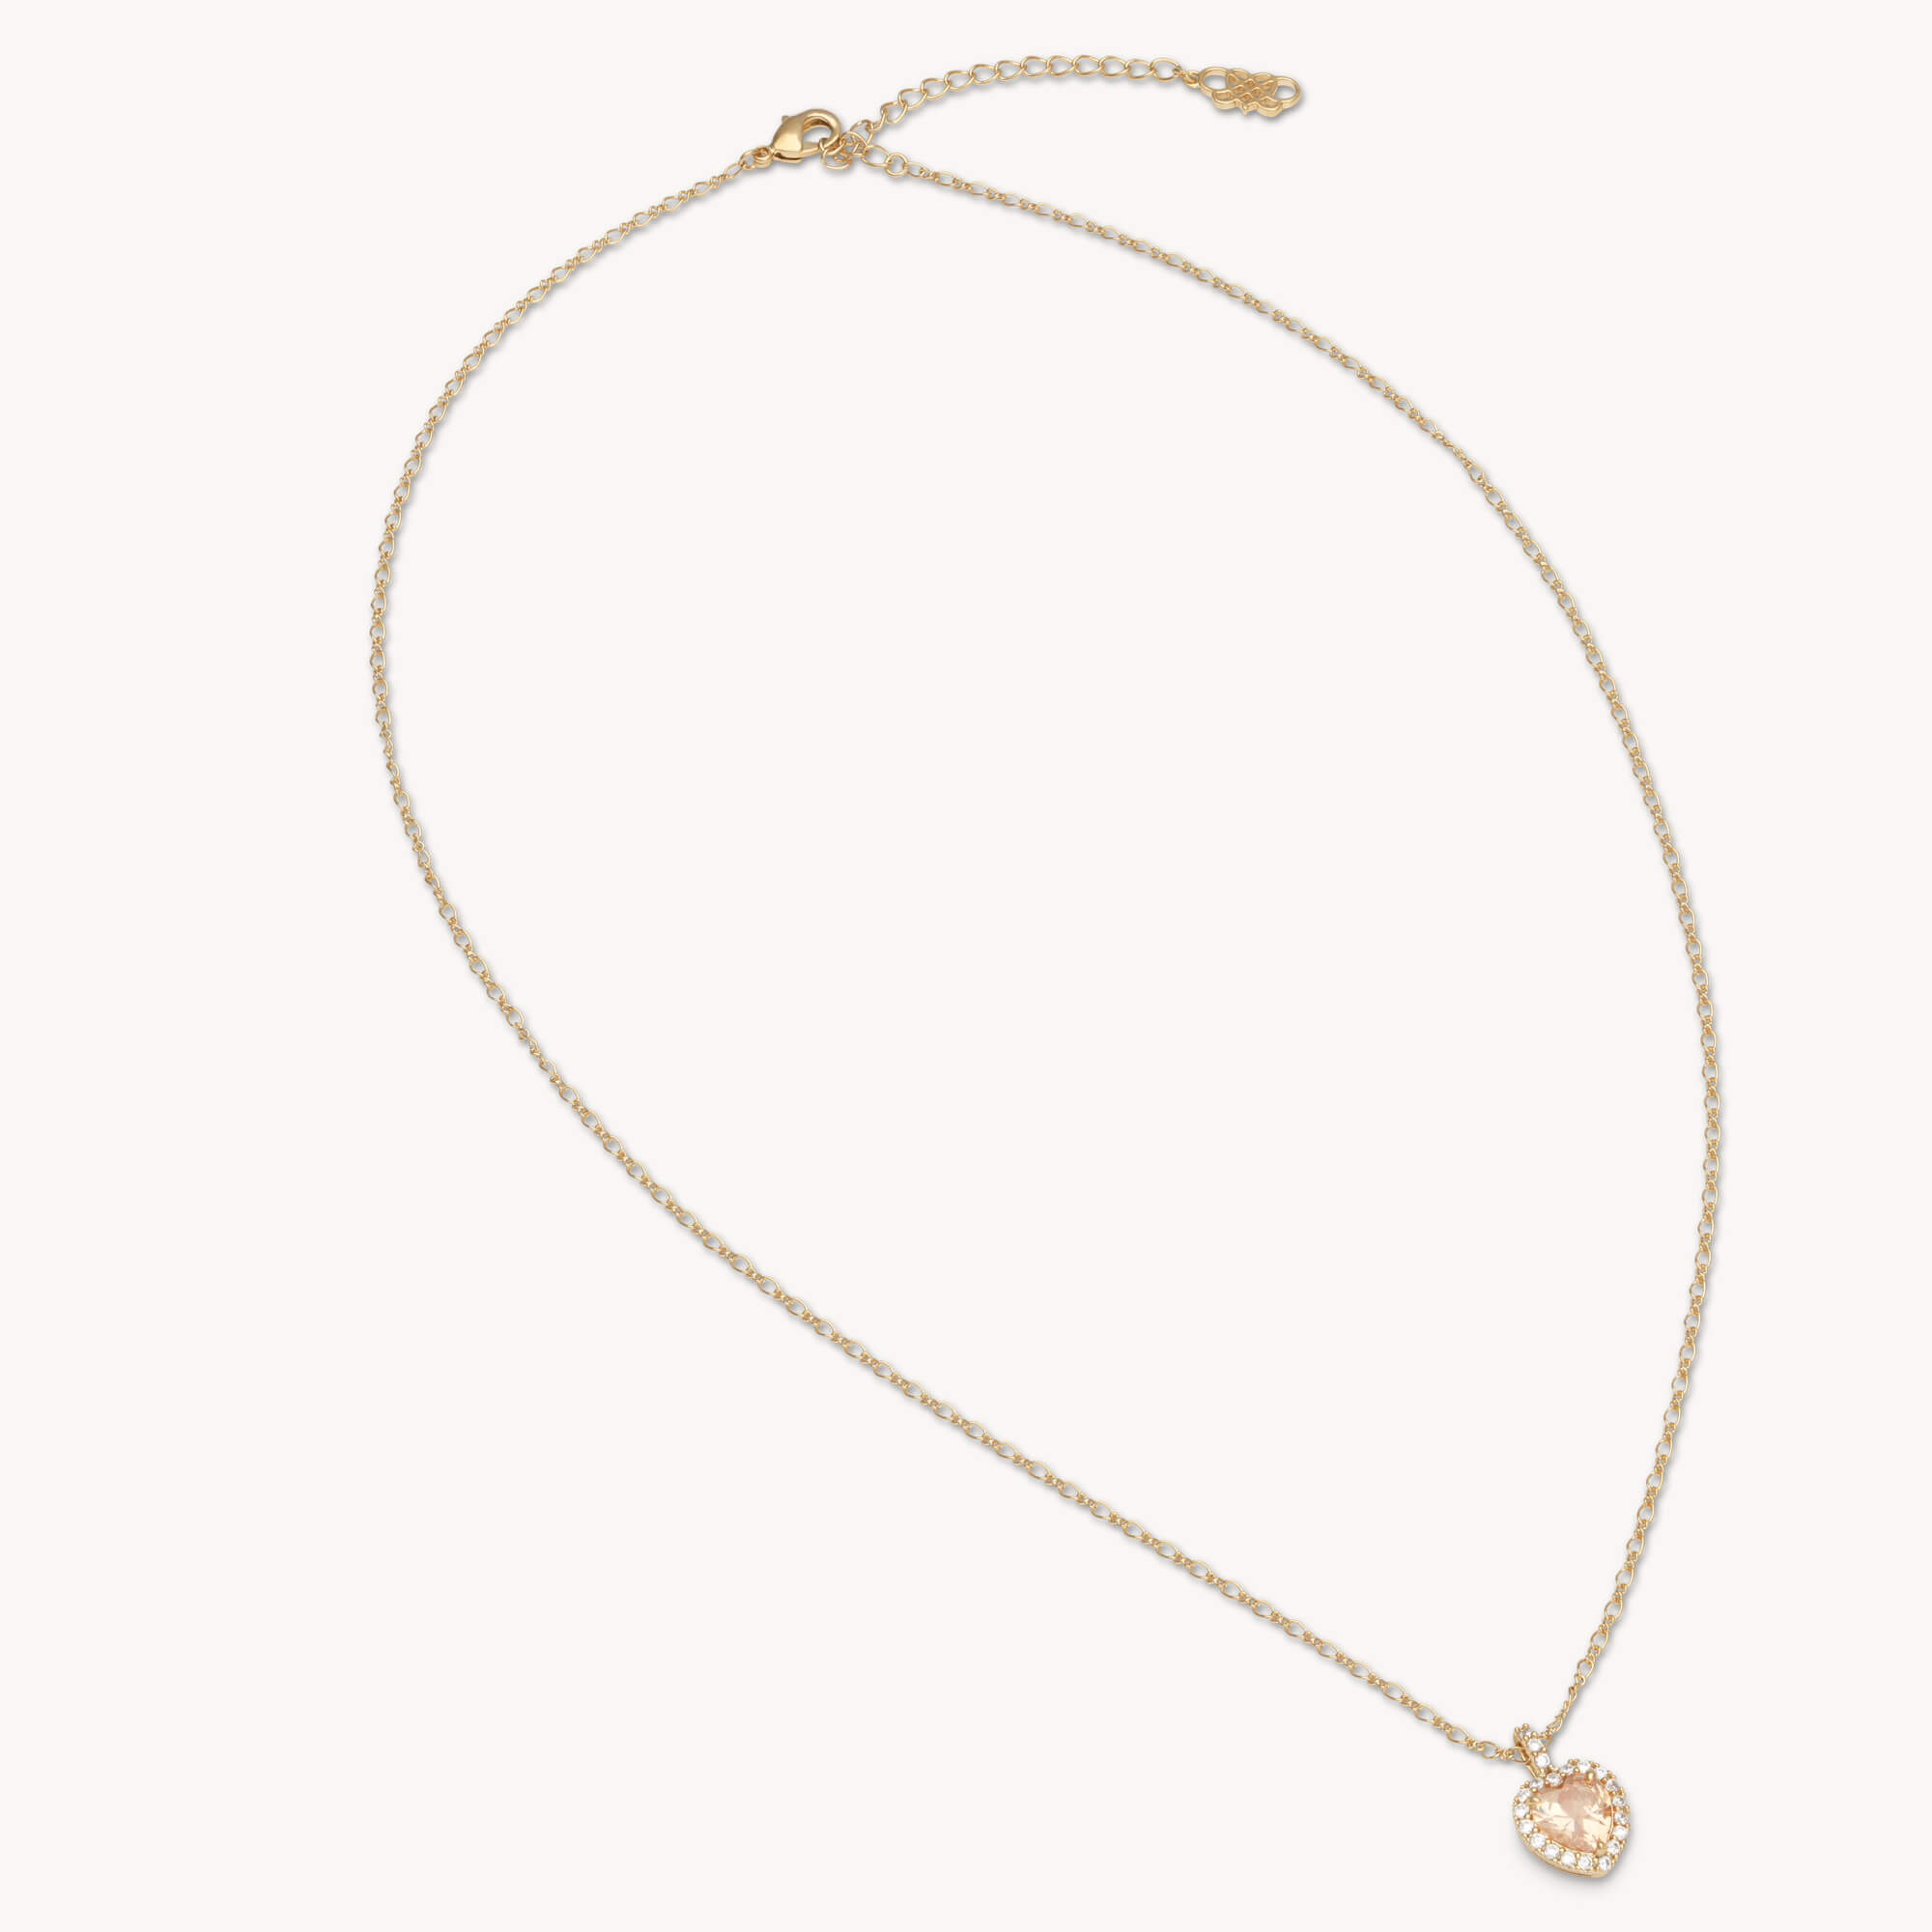 LILY AND ROSE-Delphine necklace – Light champagne-Επιχρυσωμένος ορείχαλκος